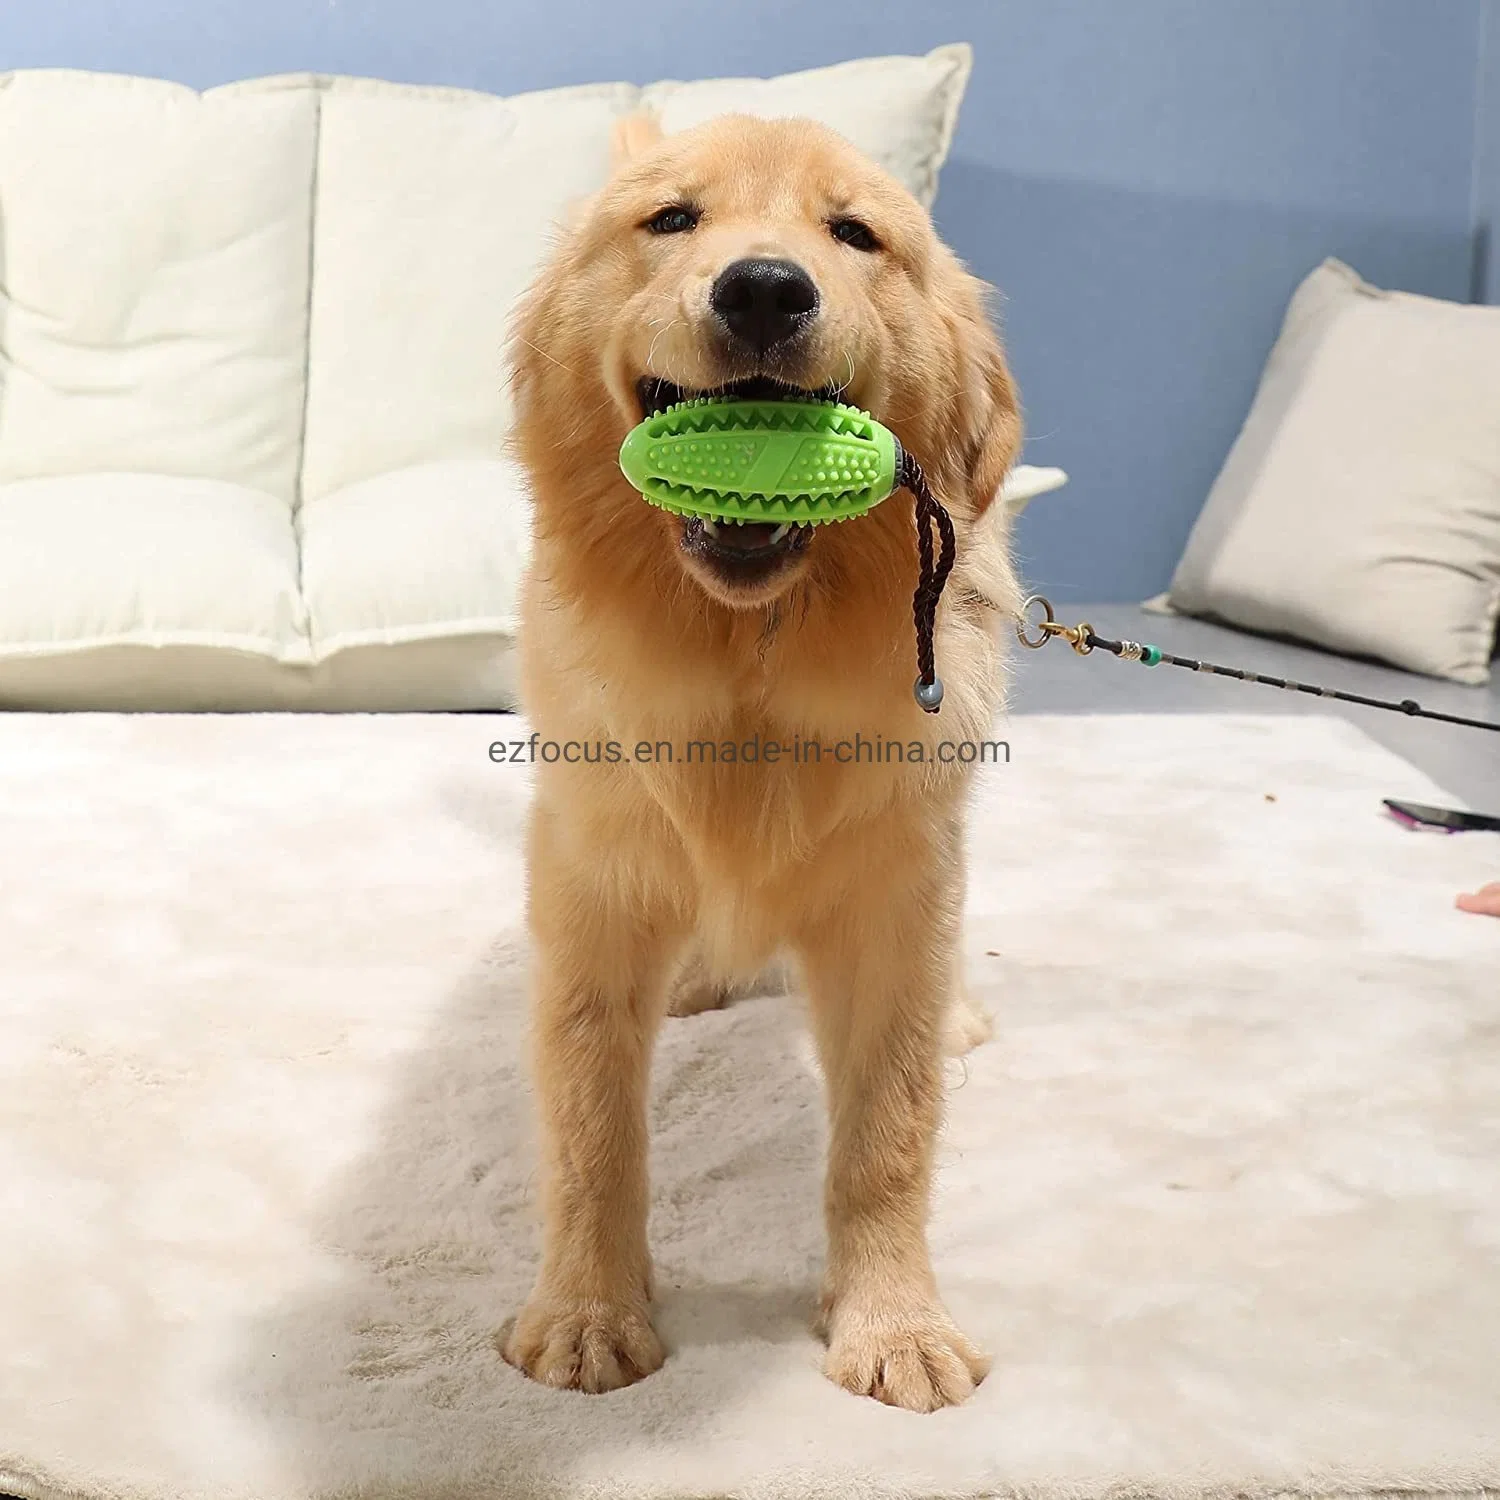 Dog Food Dispenser Toy Puppy Chewing Training Squeaky Leakage Ball Teething Toy Puzzle Dog Molars Clean Teeth Bite-Resistant Bouncy Ball Rubber Ball Wbb12398